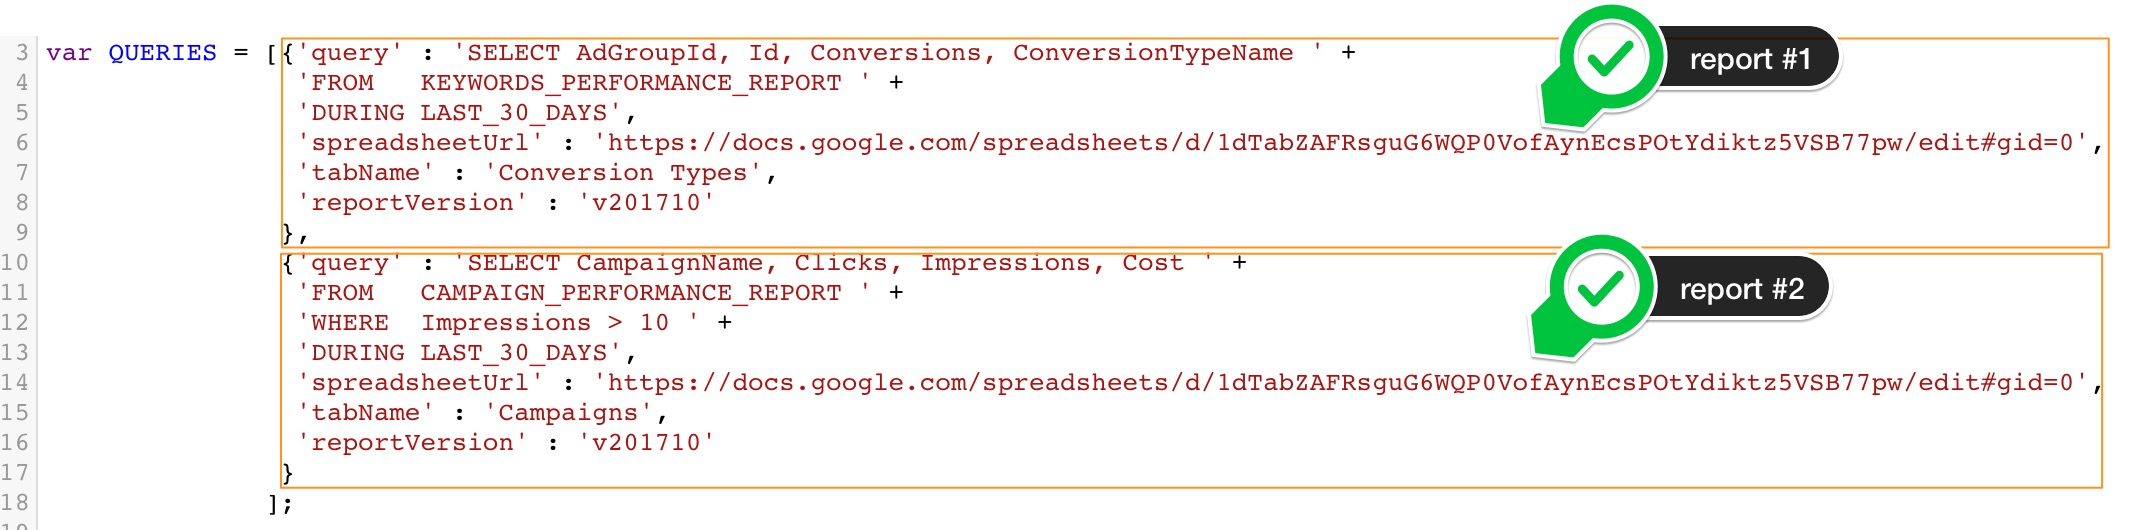 Queries to Put AdWords Reports in Spreadsheet